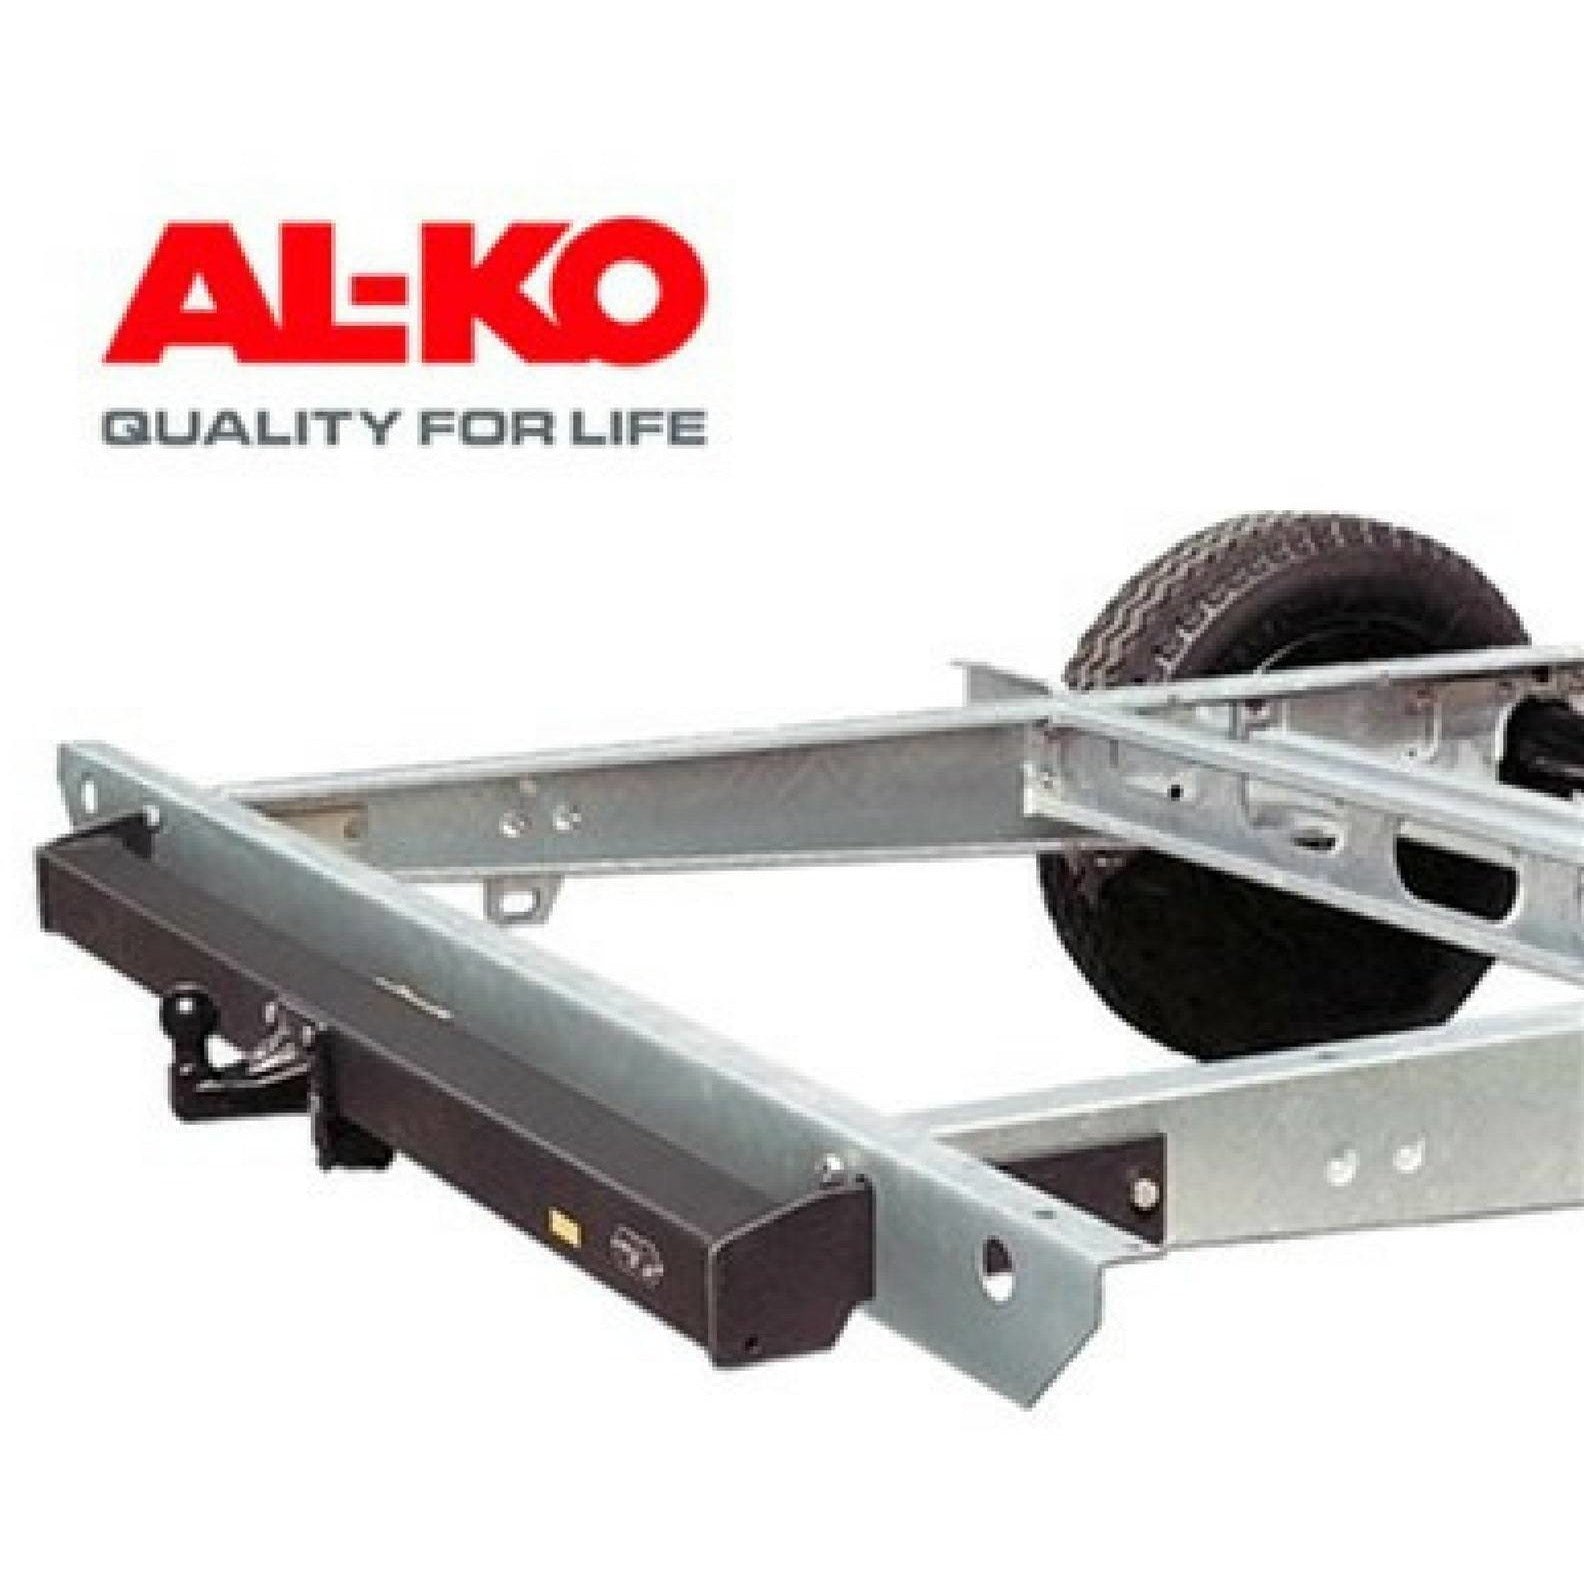 ALKO Towbar Assembly (1202254) made by ALKO. A Towing sold by Quality Caravan Awnings